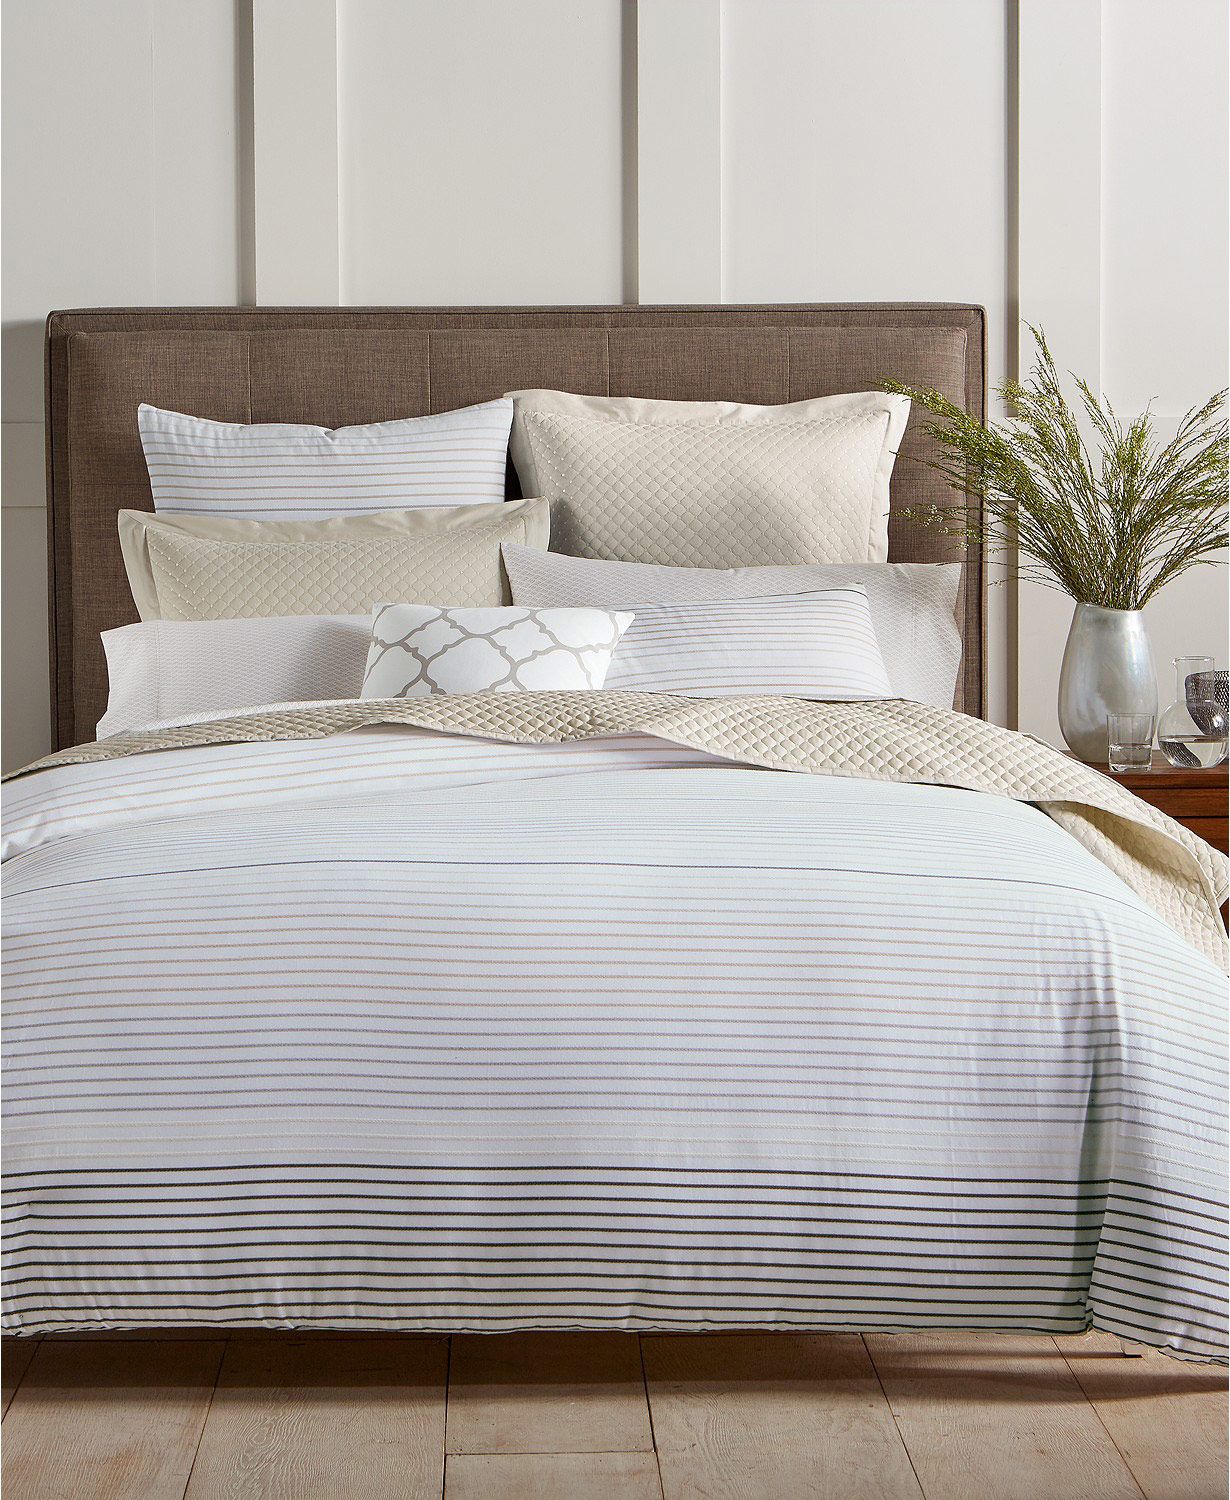 Macy’s Bedding Closeout Sale 2019